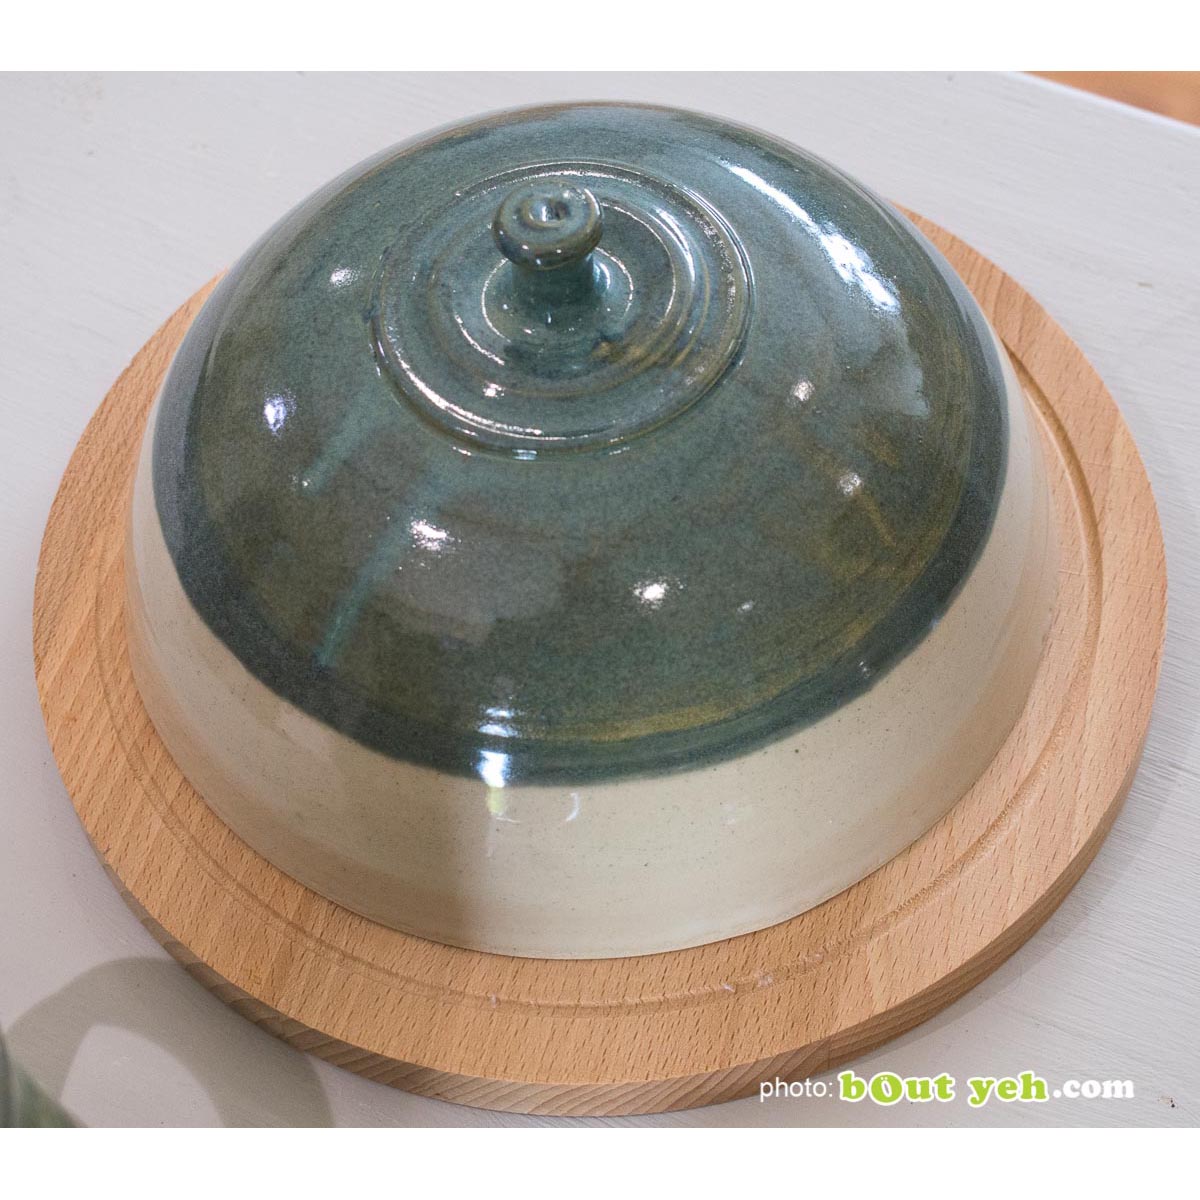 Green and cream cheeseboard bell and serving board - contemporary Irish ceramic pottery for sale. Photo 1468